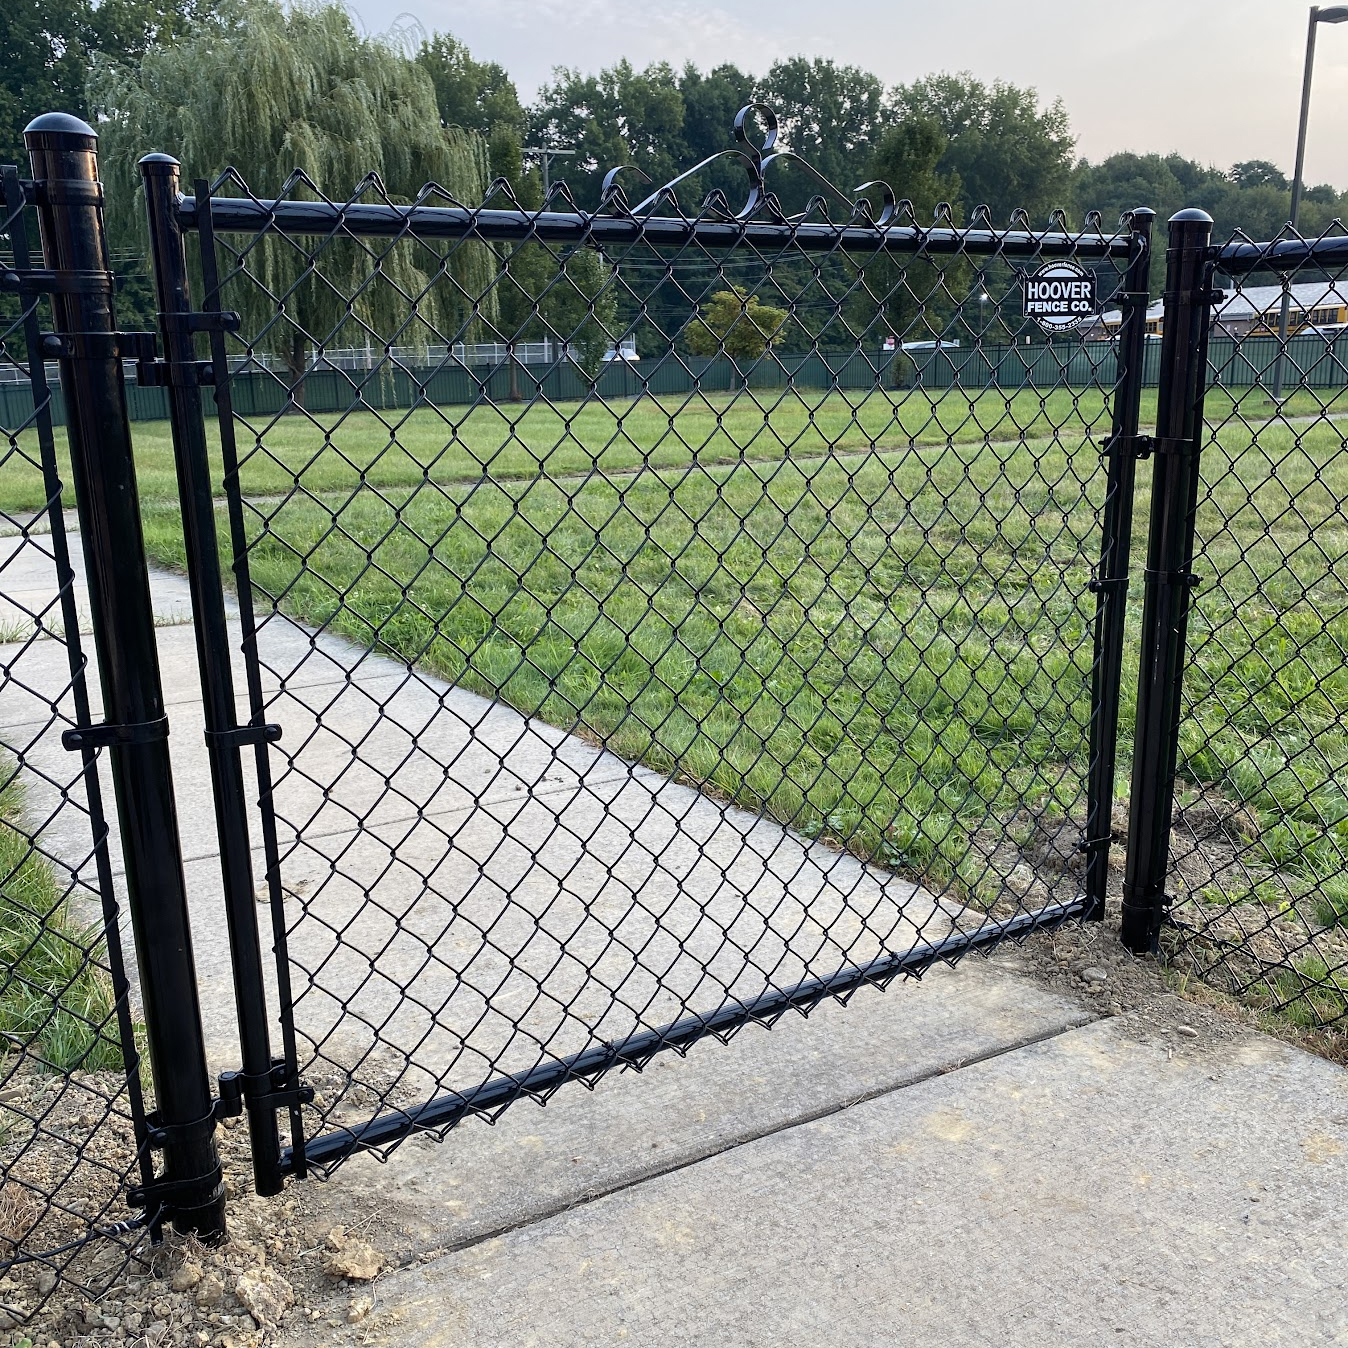 Hoover Fence Residential Chain Link Fence Single Swing Gate